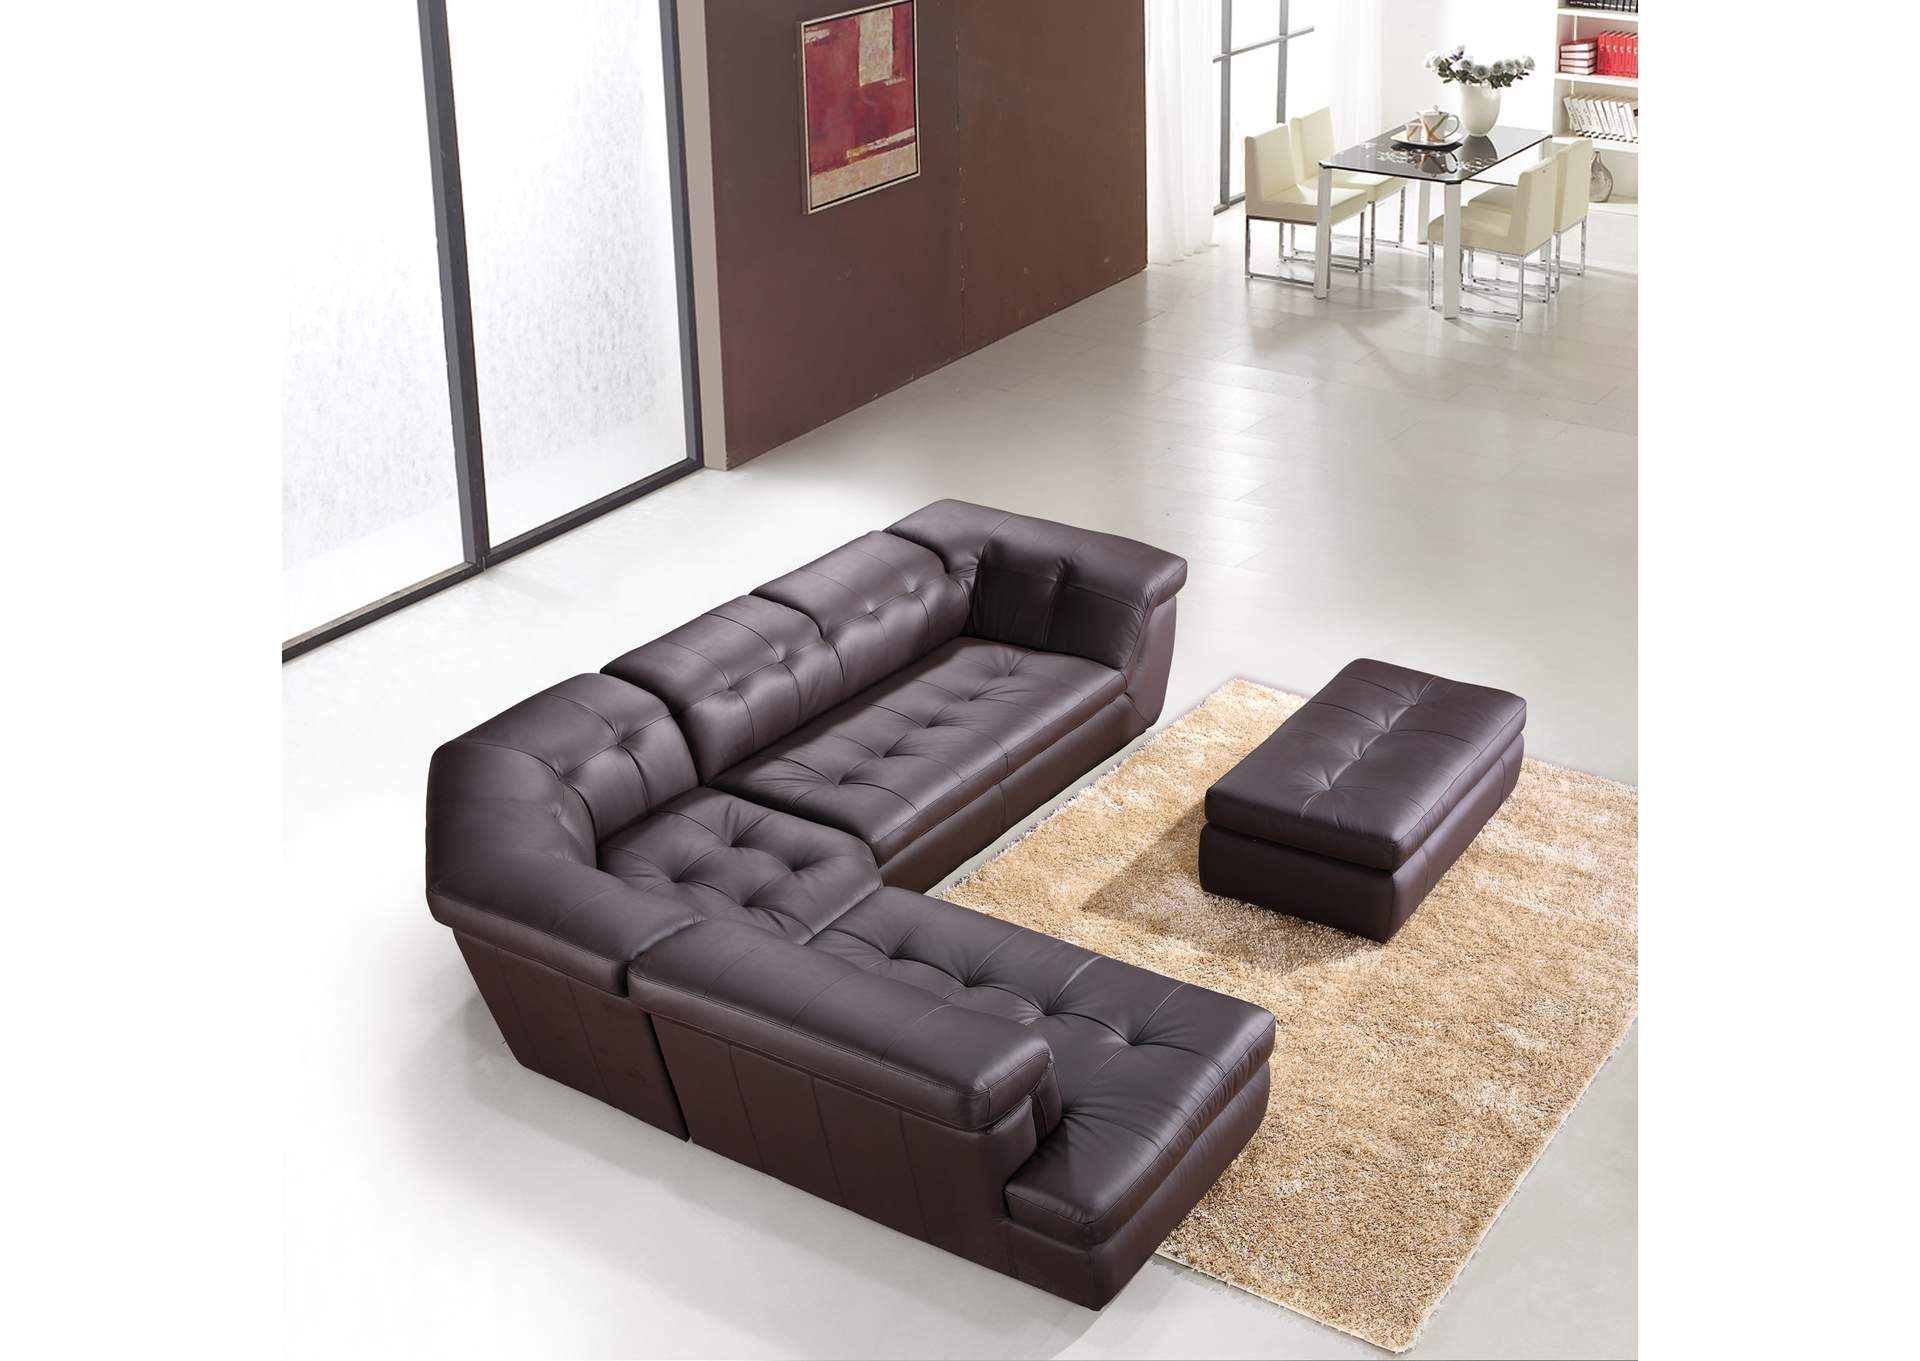 397 Italian Leather Sectional Chocolate Color in Left Hand Facing,J&M Furniture